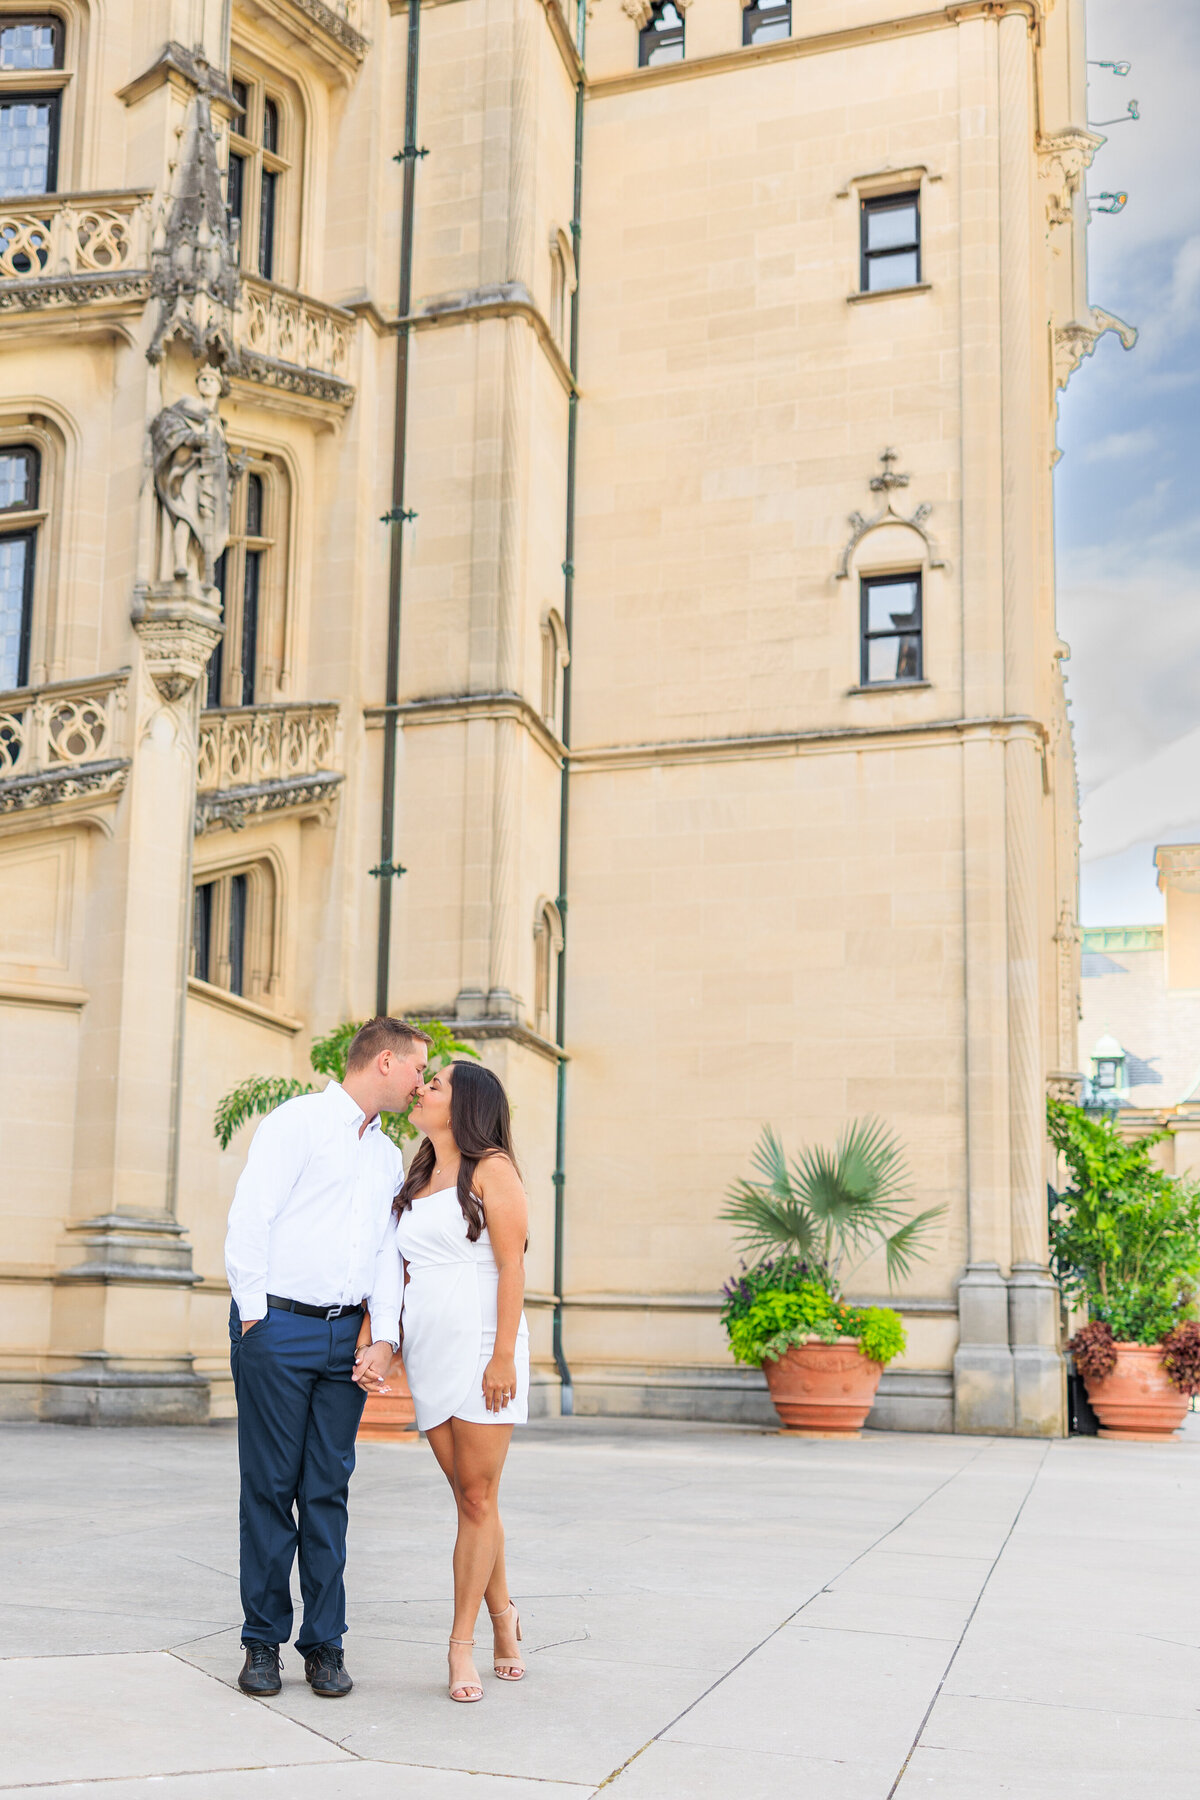 Jessica & Ryan Engagements at Biltmore Estate - Tracy Waldrop Photography-5